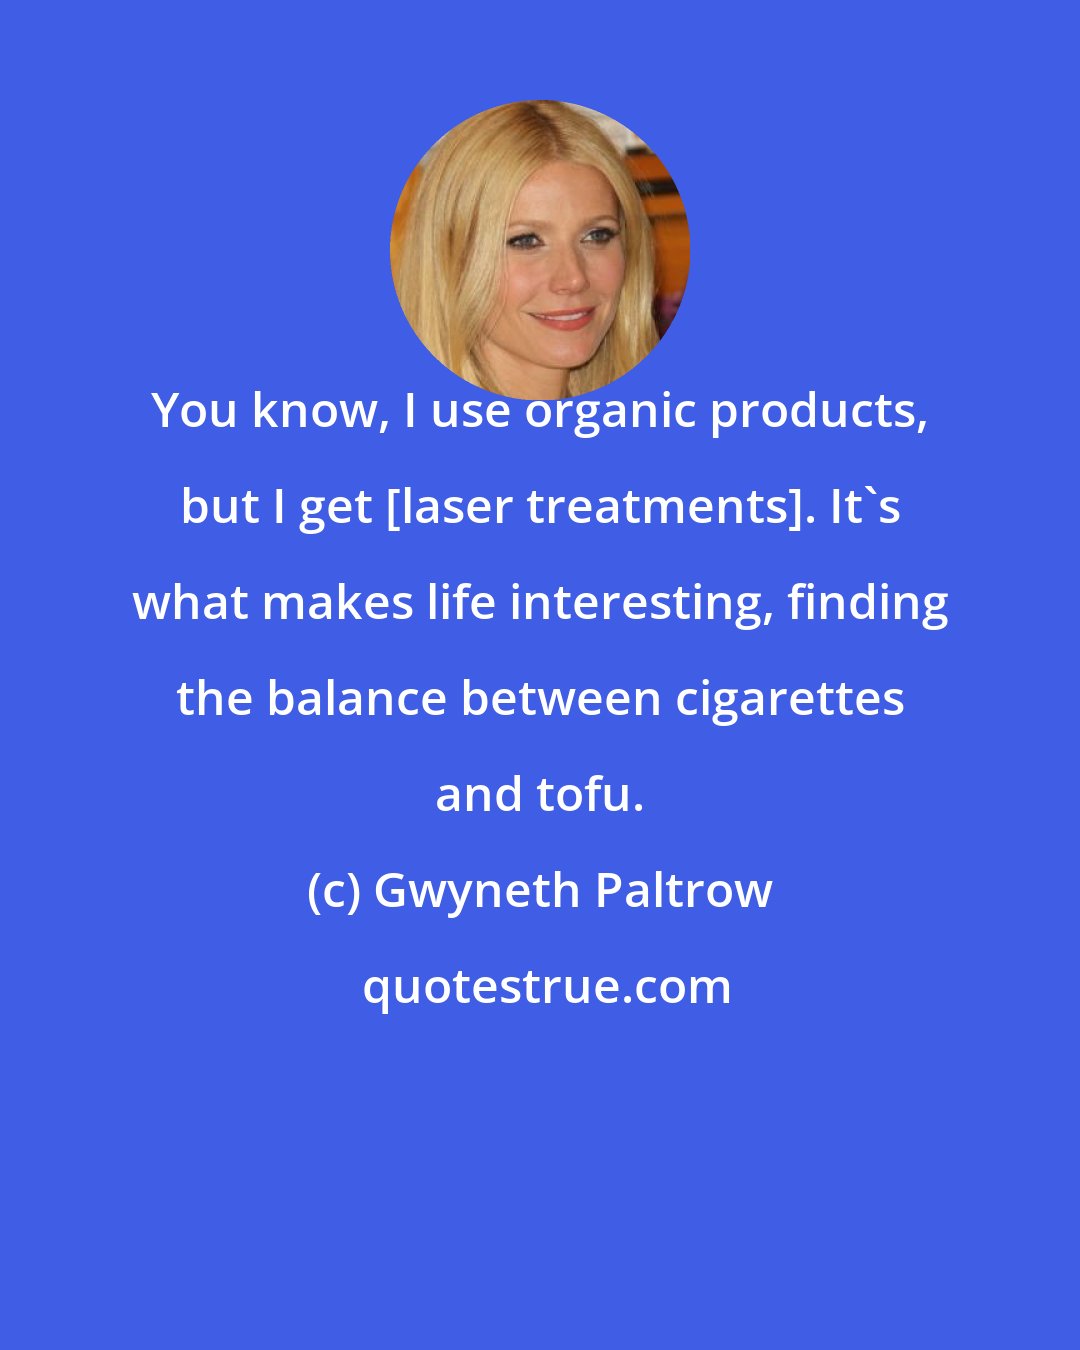 Gwyneth Paltrow: You know, I use organic products, but I get [laser treatments]. It's what makes life interesting, finding the balance between cigarettes and tofu.